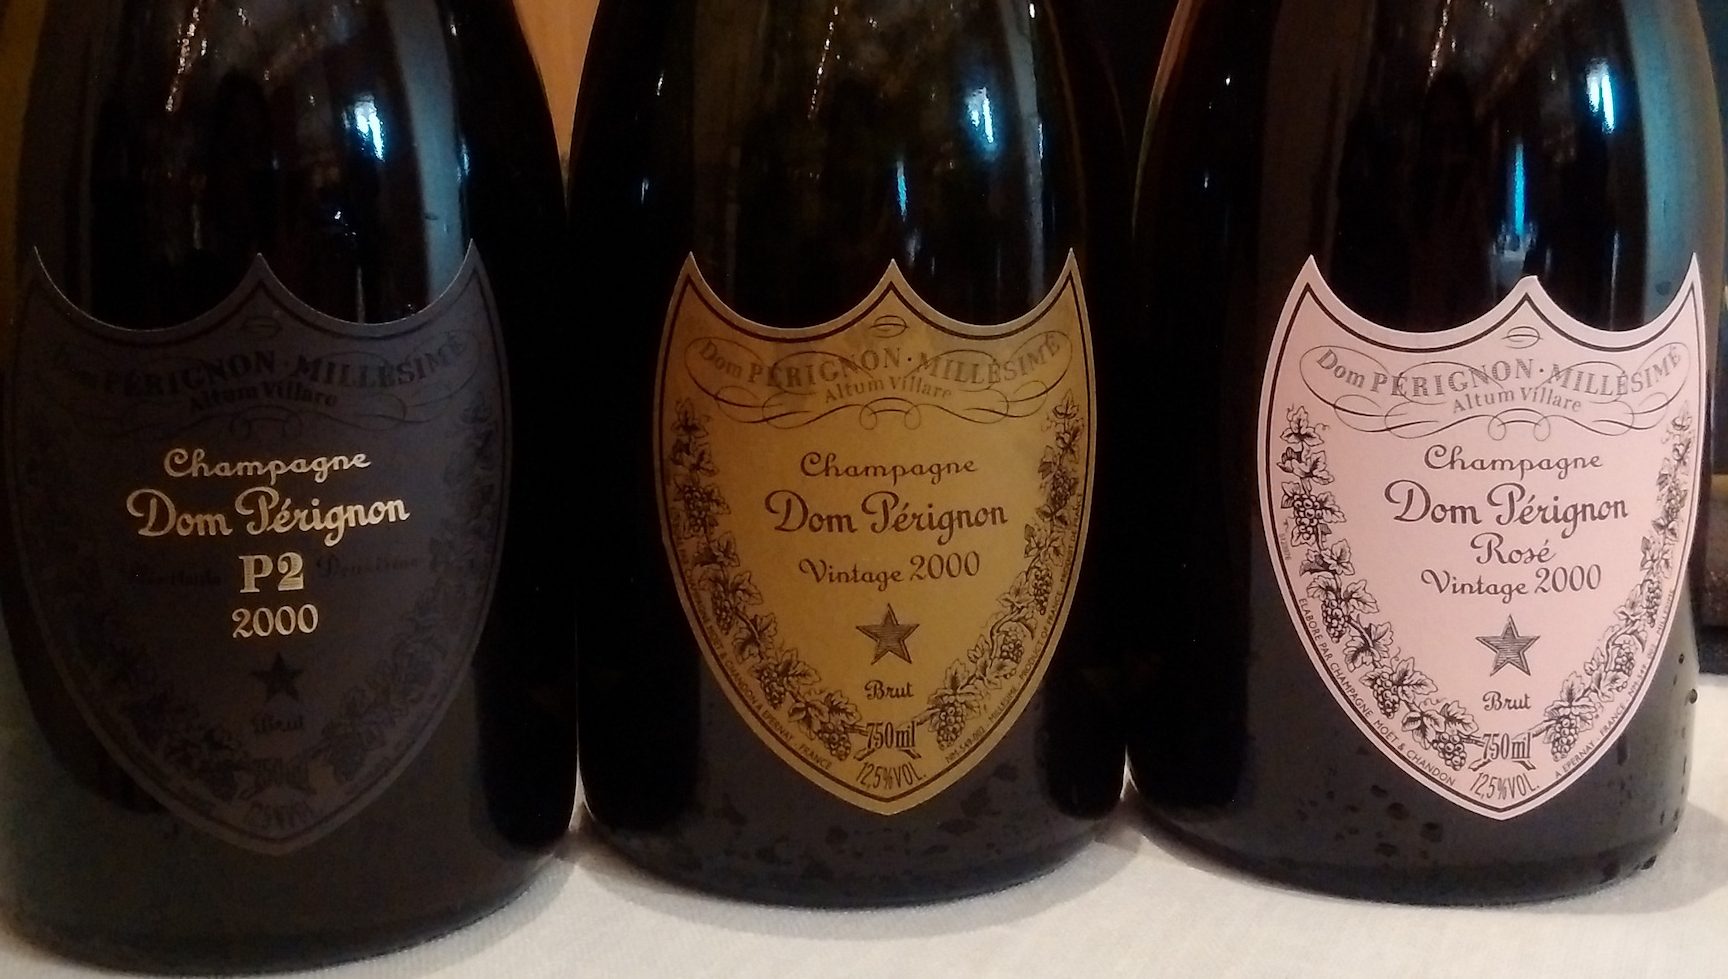 How Dom Pérignon P2 2000 is all about the pursuit of energy